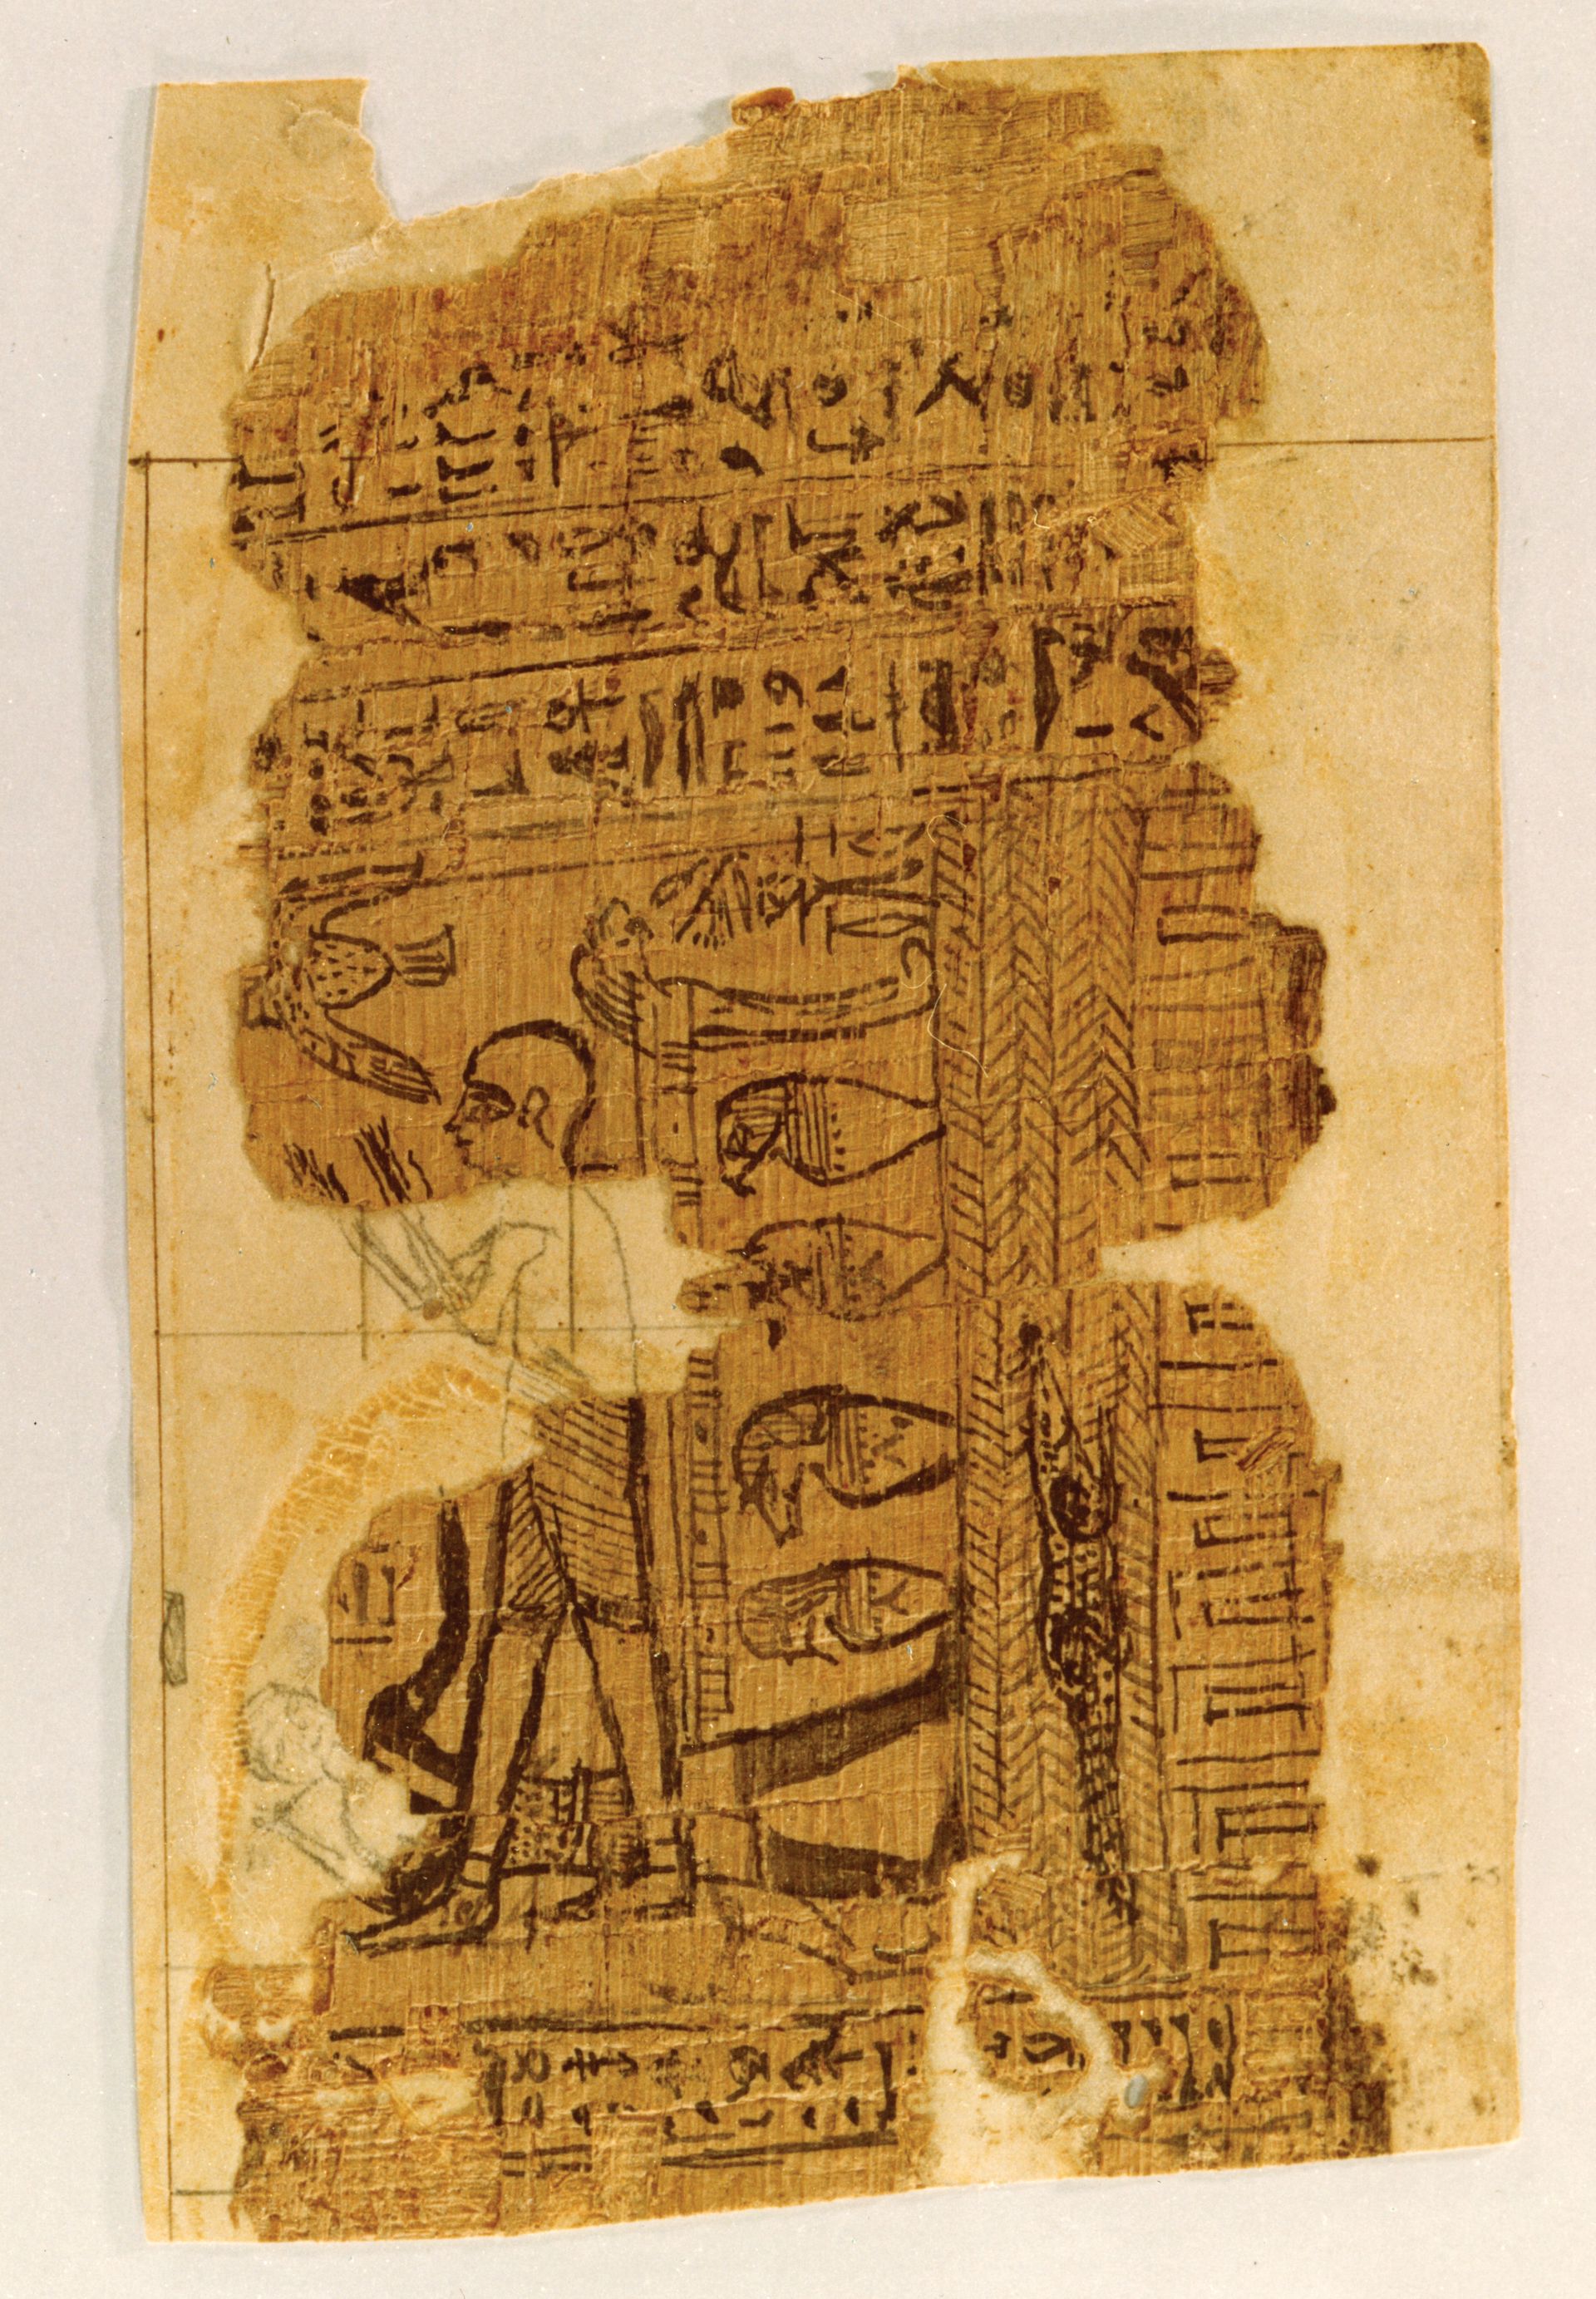 A photograph of the Egyptian papyri that was the source for Facsimile No. 1.